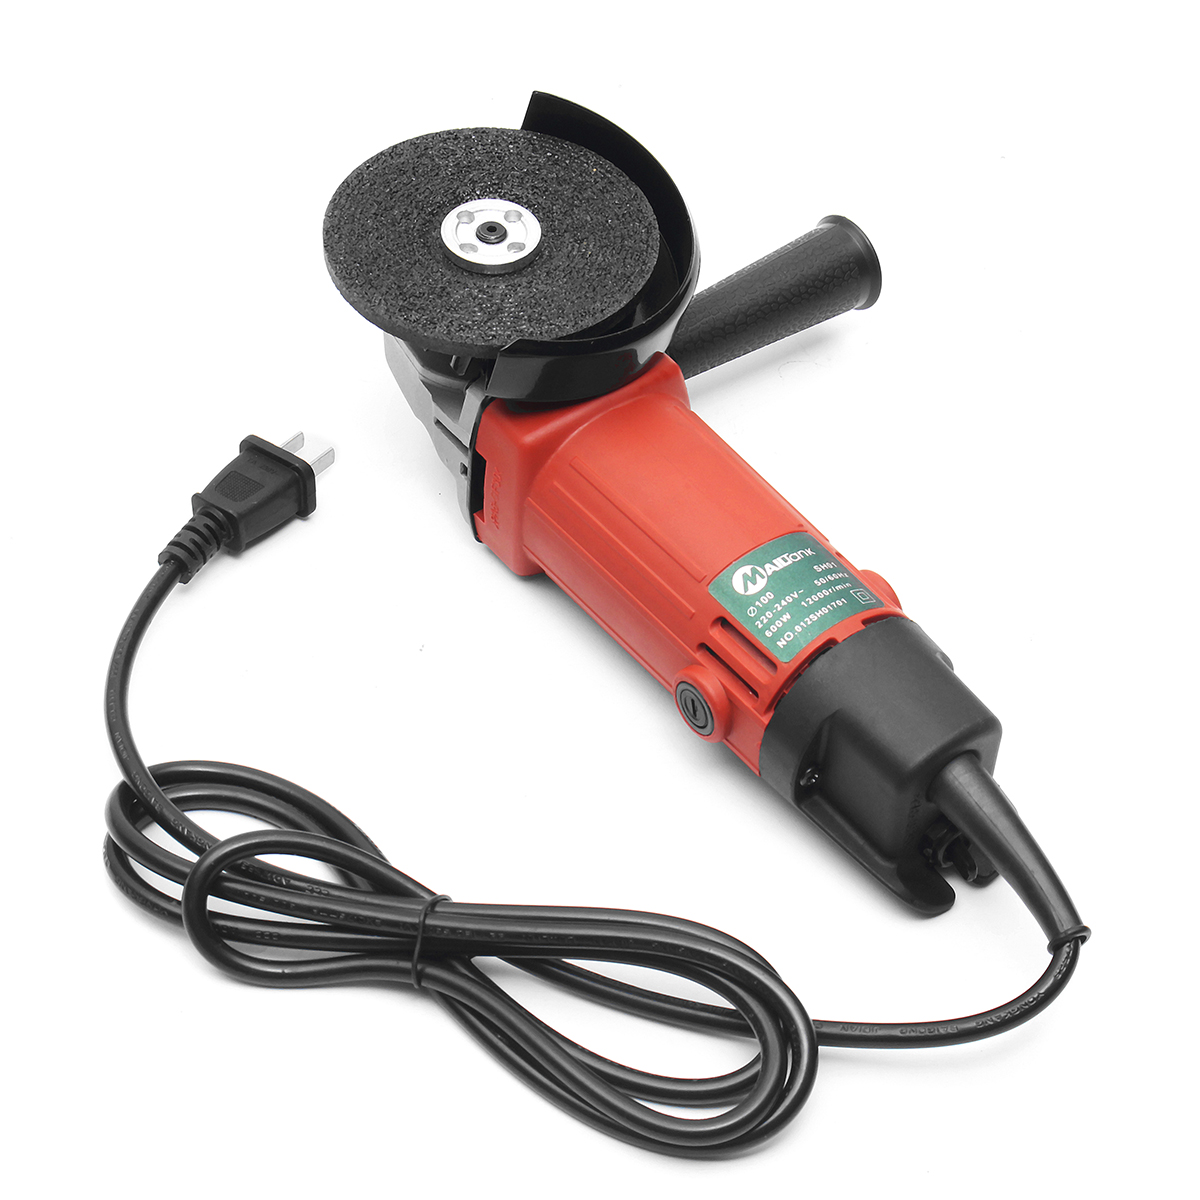 220V-600W-Multifunctional-Electric-Angle-Grinder-Polishing-Machine-Metal-Grinding-Cutter-Tool-1292095-1